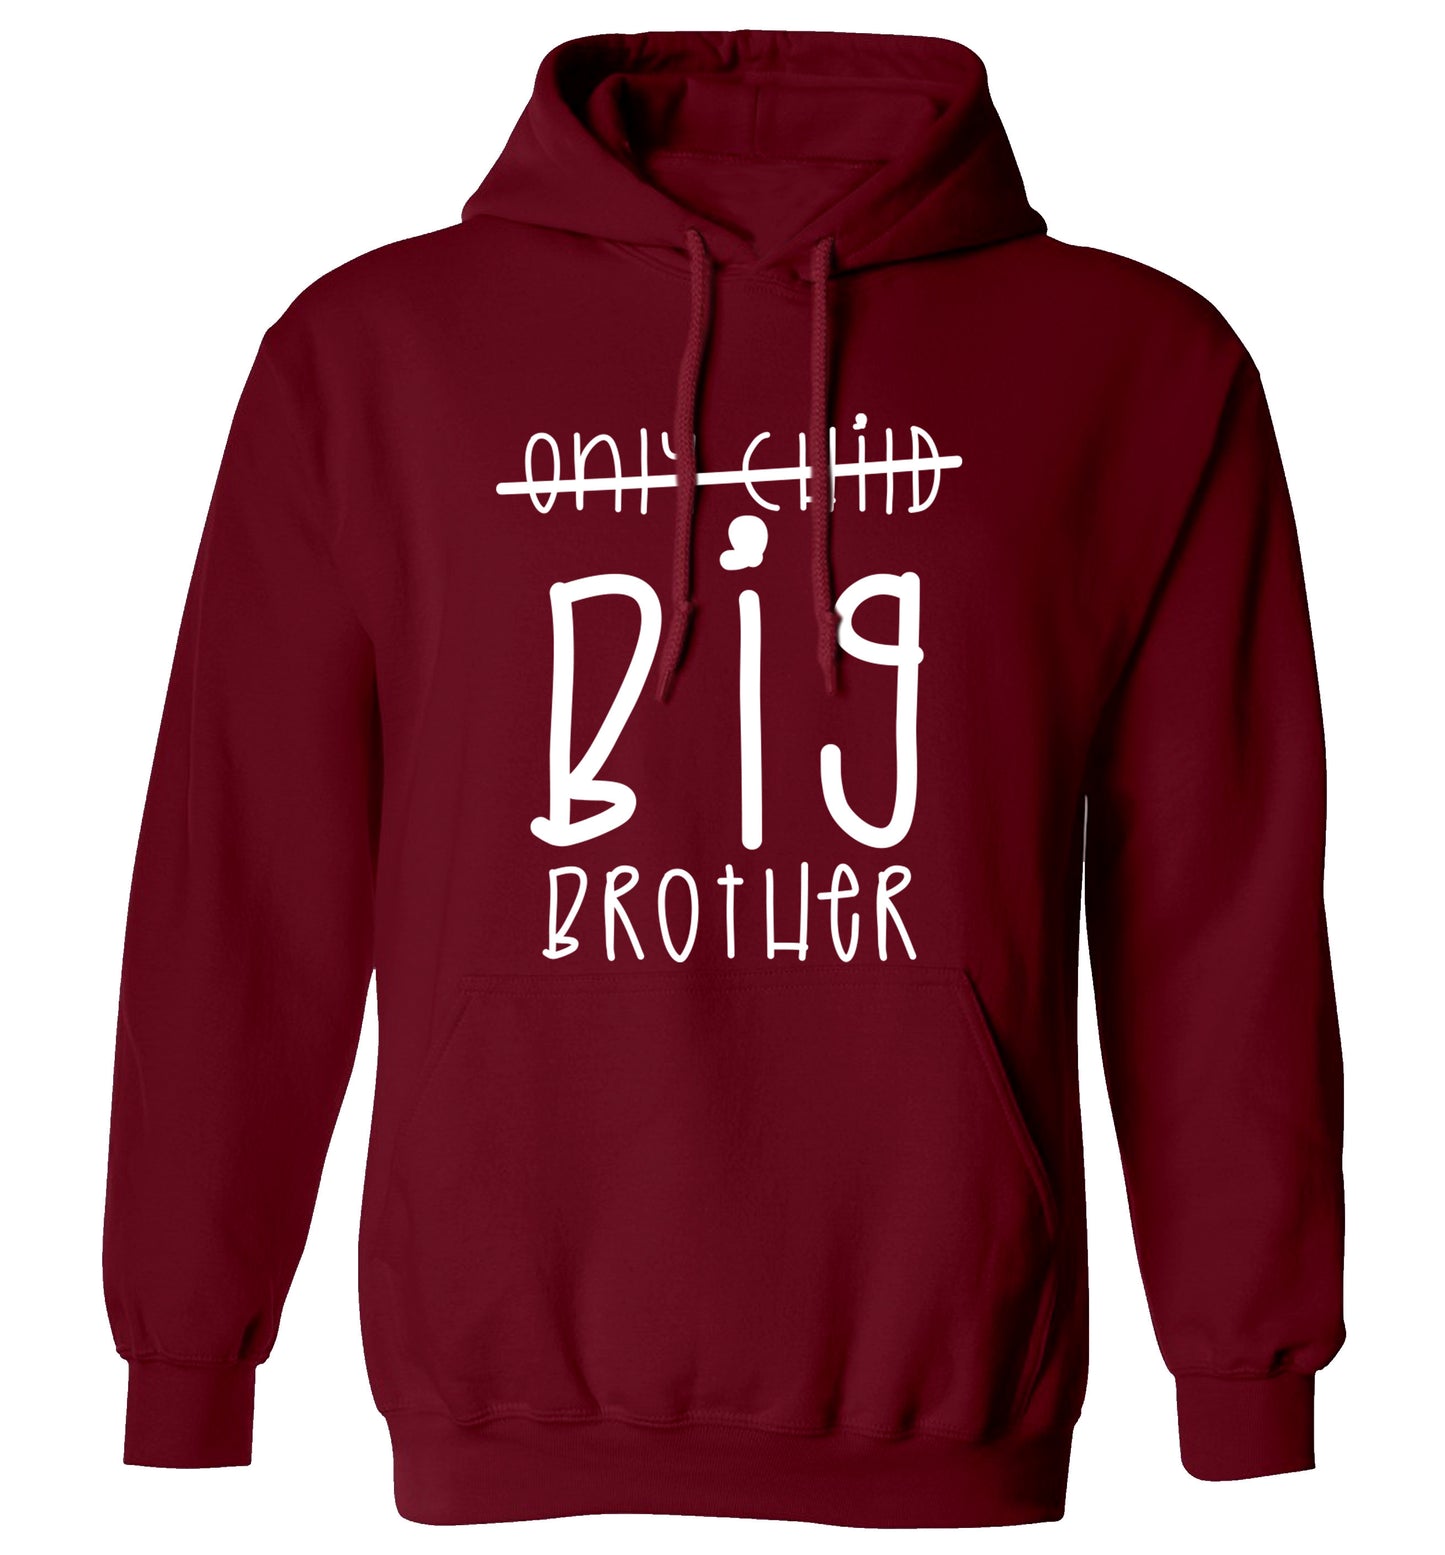 Only child big brother adults unisex maroon hoodie 2XL